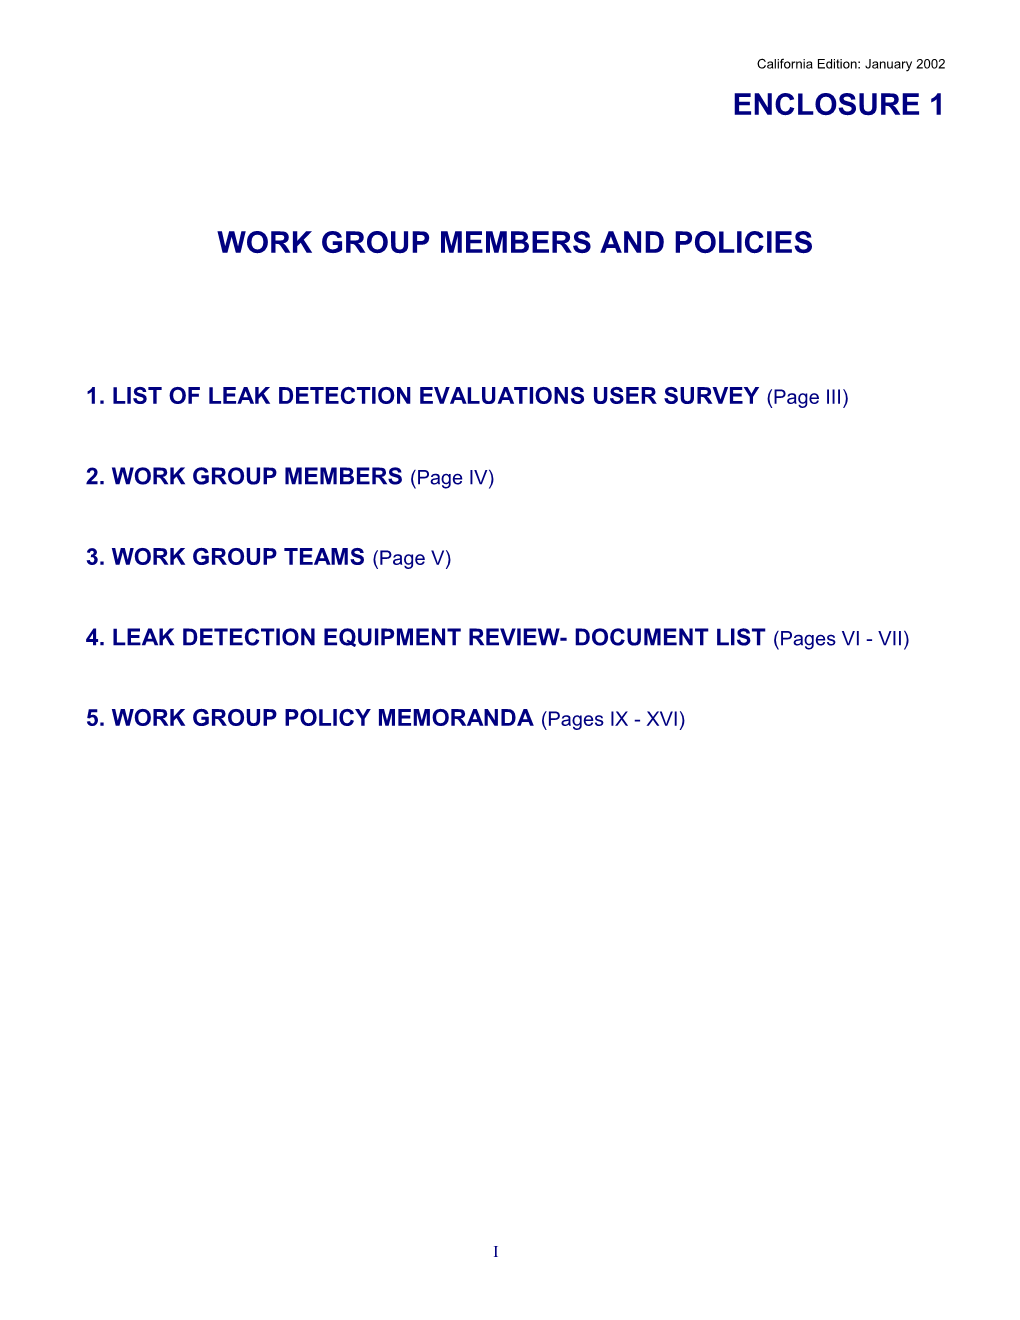 Work Group Members and Policies